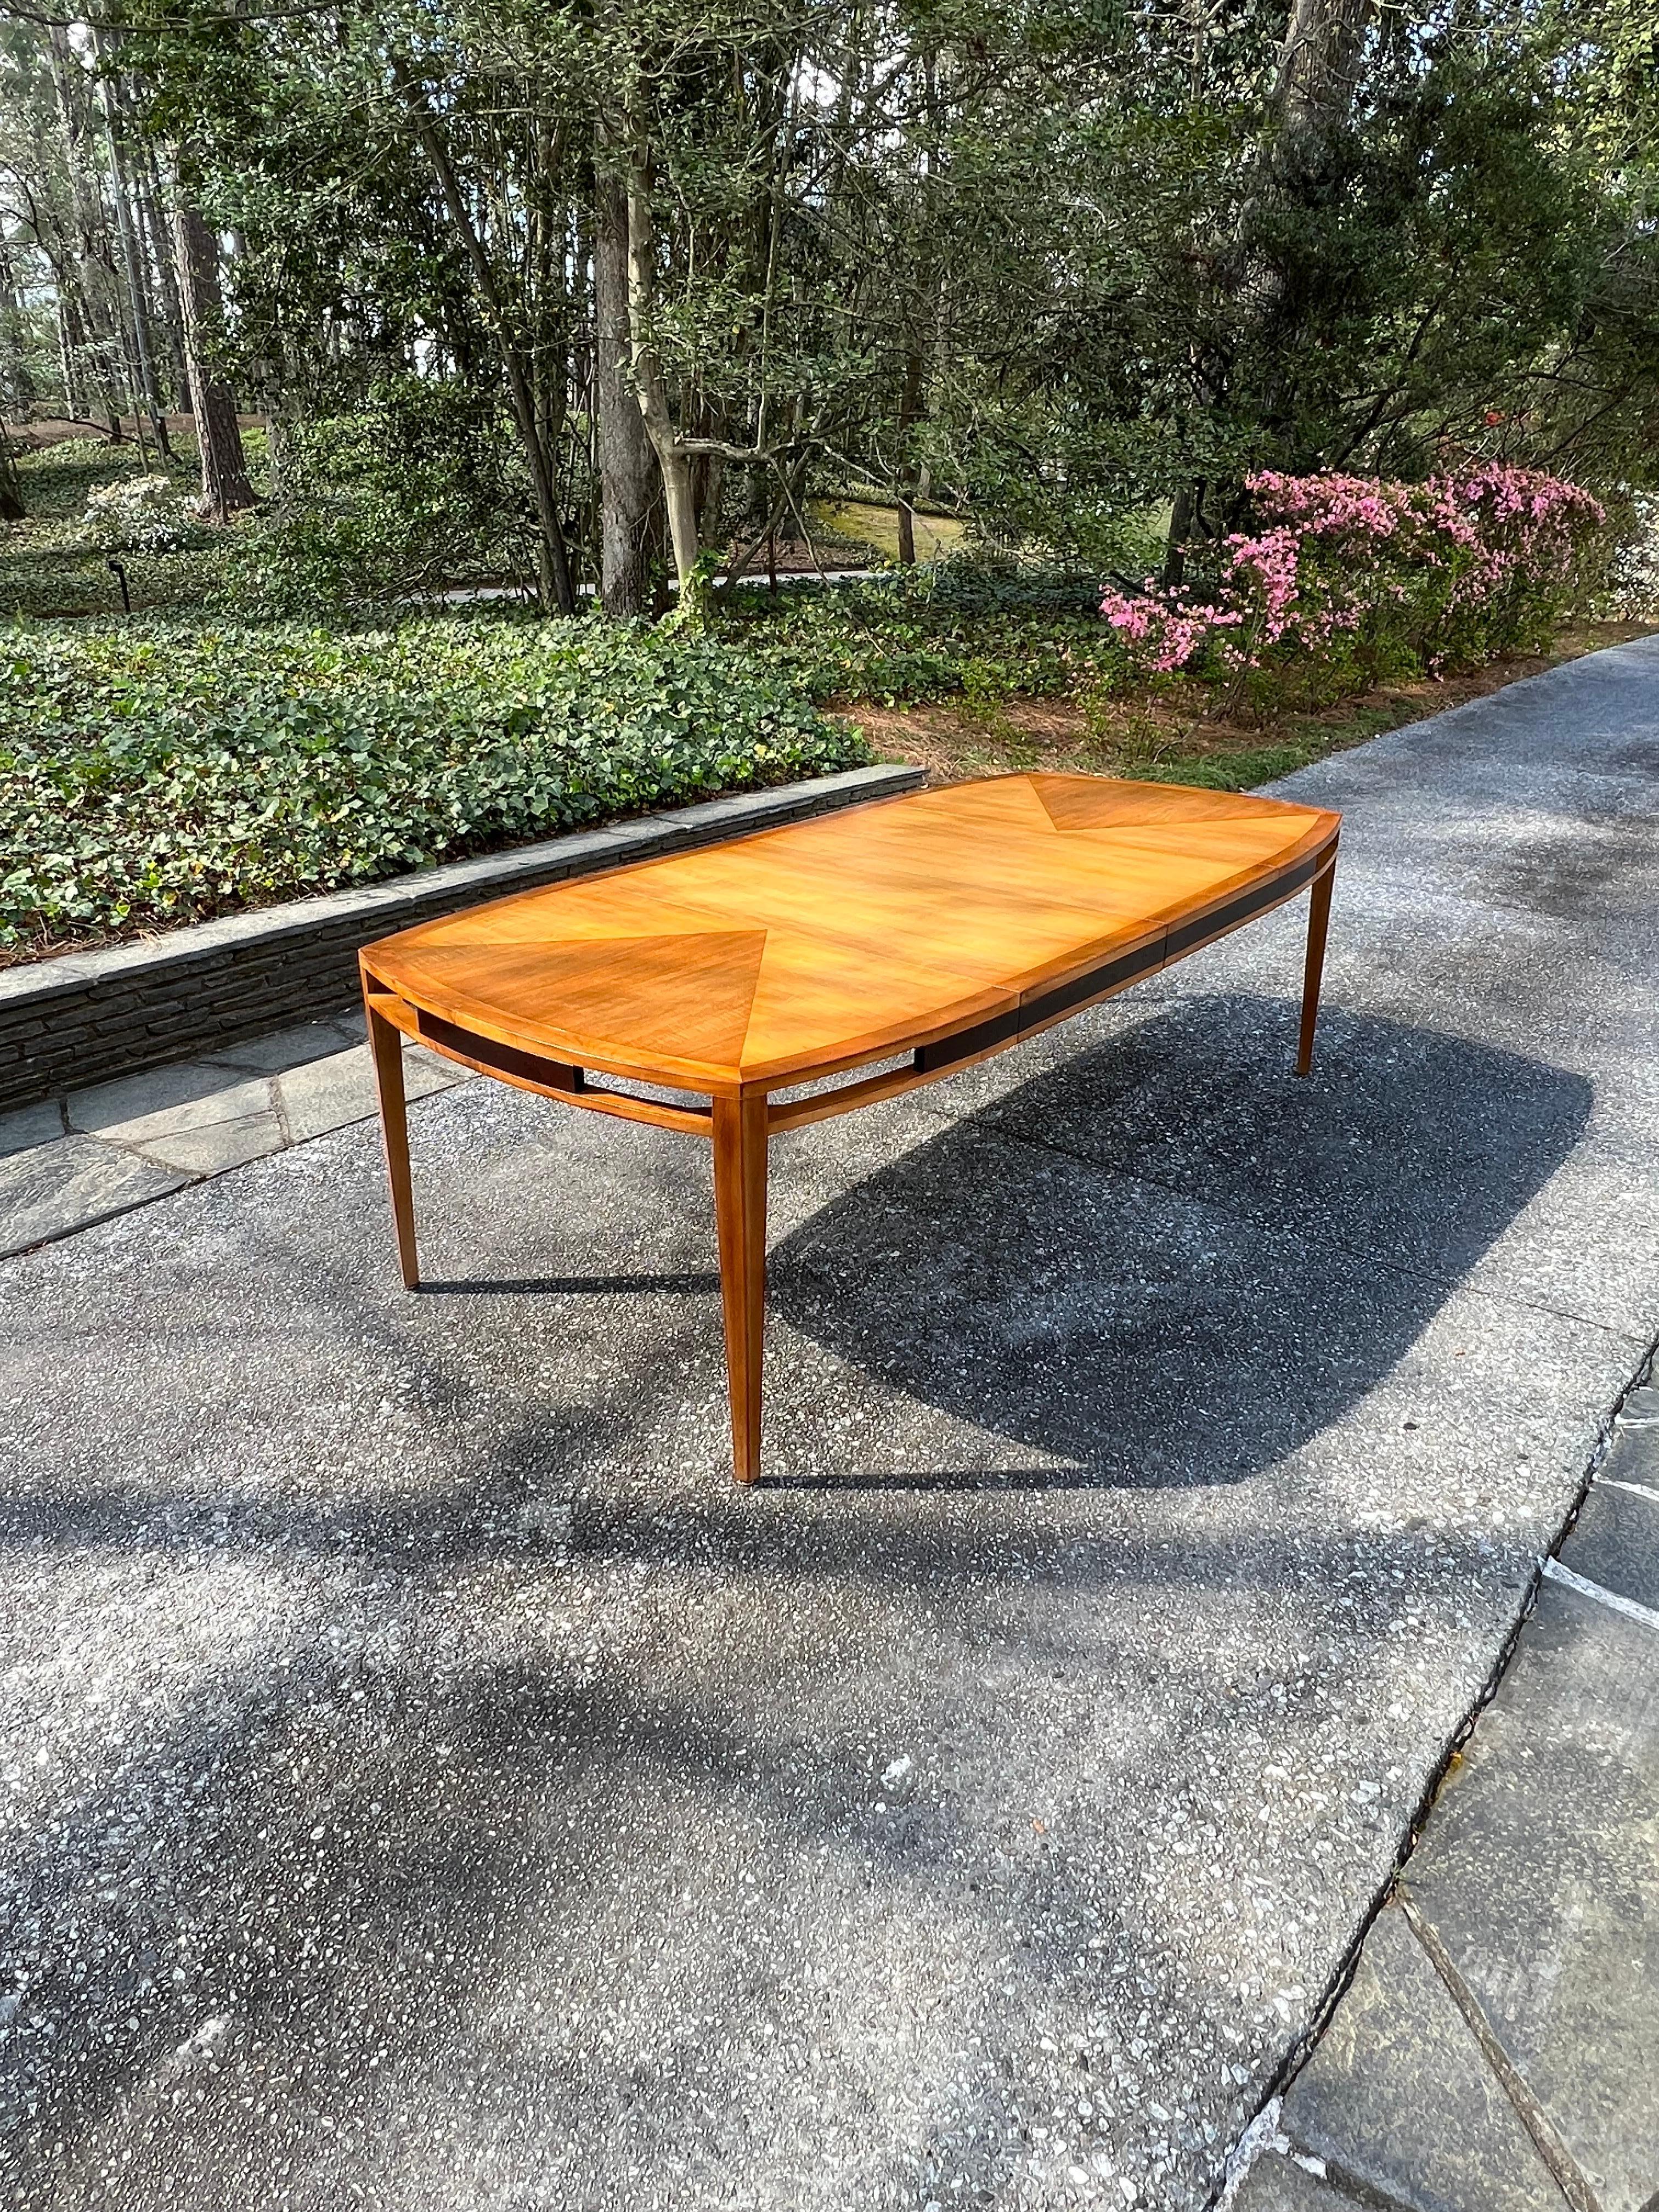 This magnificent dining table is shipped as professionally photographed and described in the listing narrative: Meticulously professionally restored and installation ready. This rare Taylor example is unique on the World market.

A breathtaking